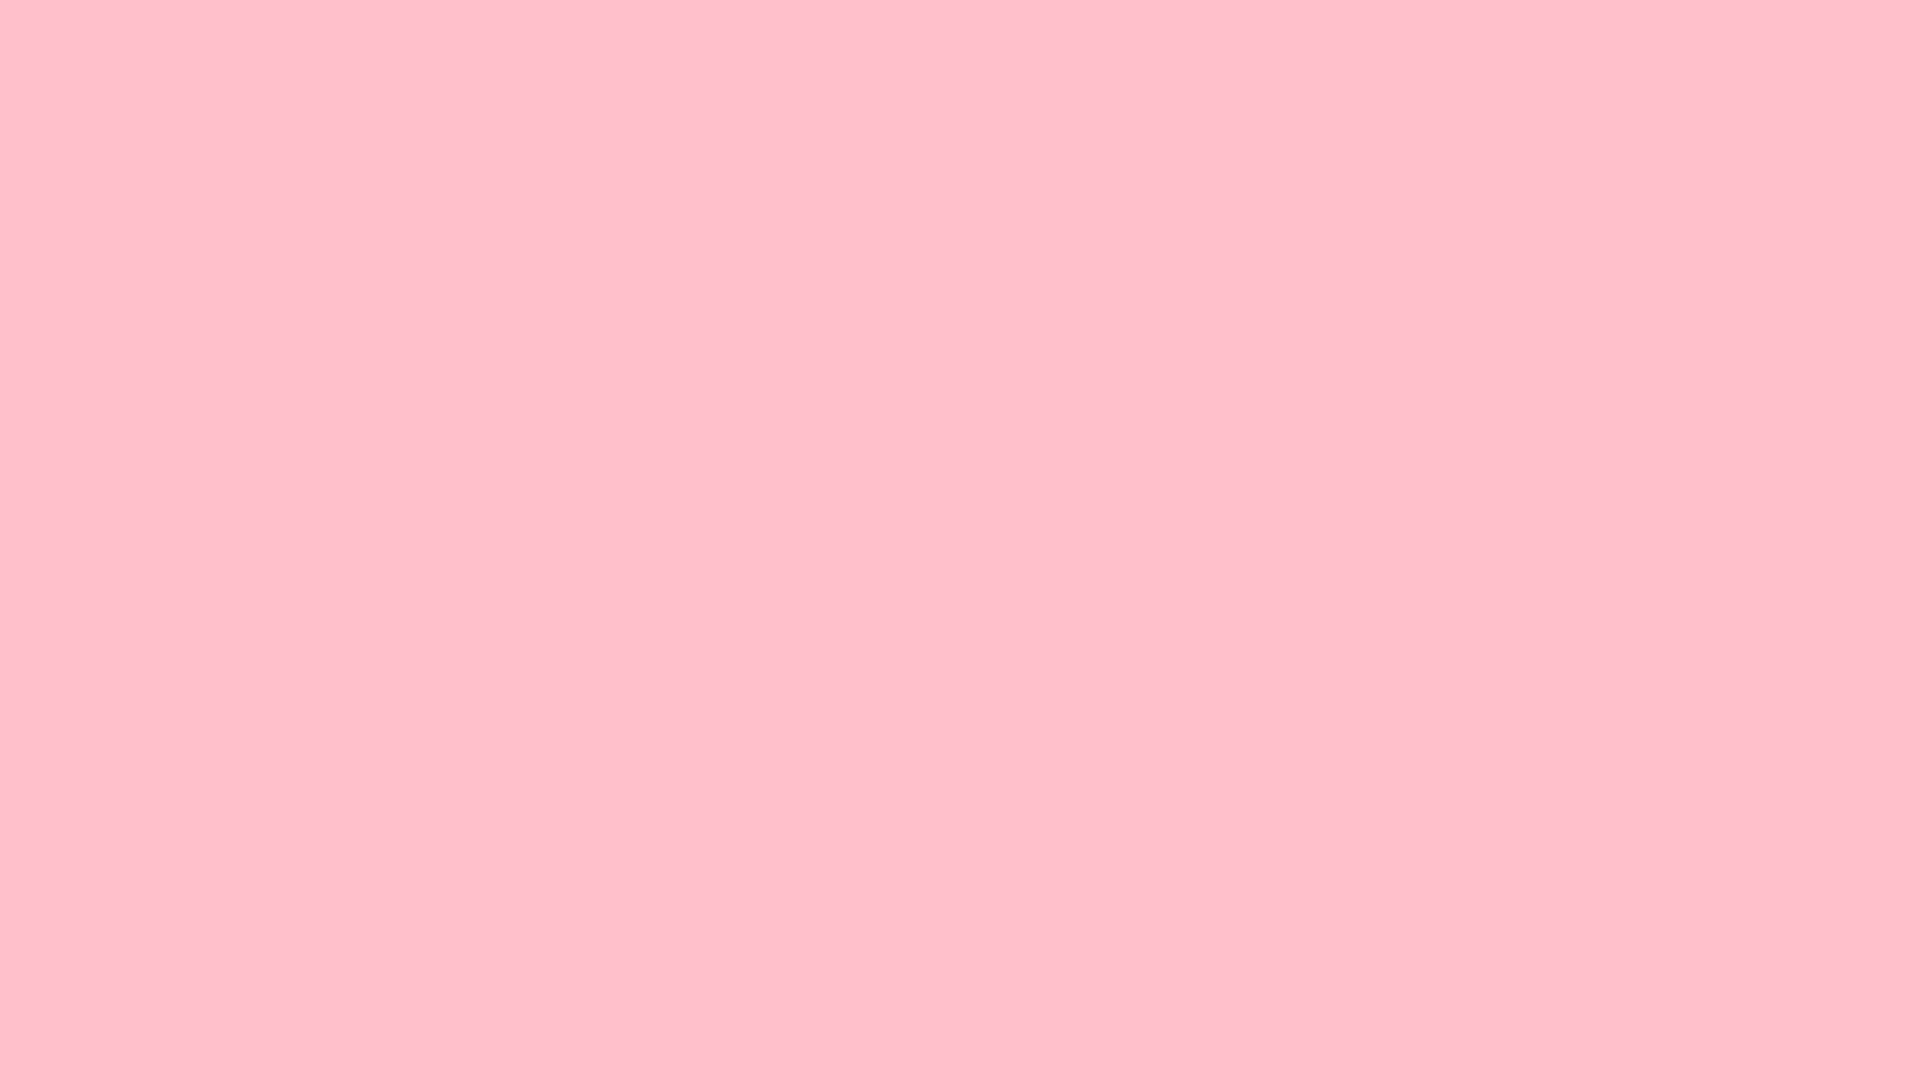 A pink background with white text - Pastel pink